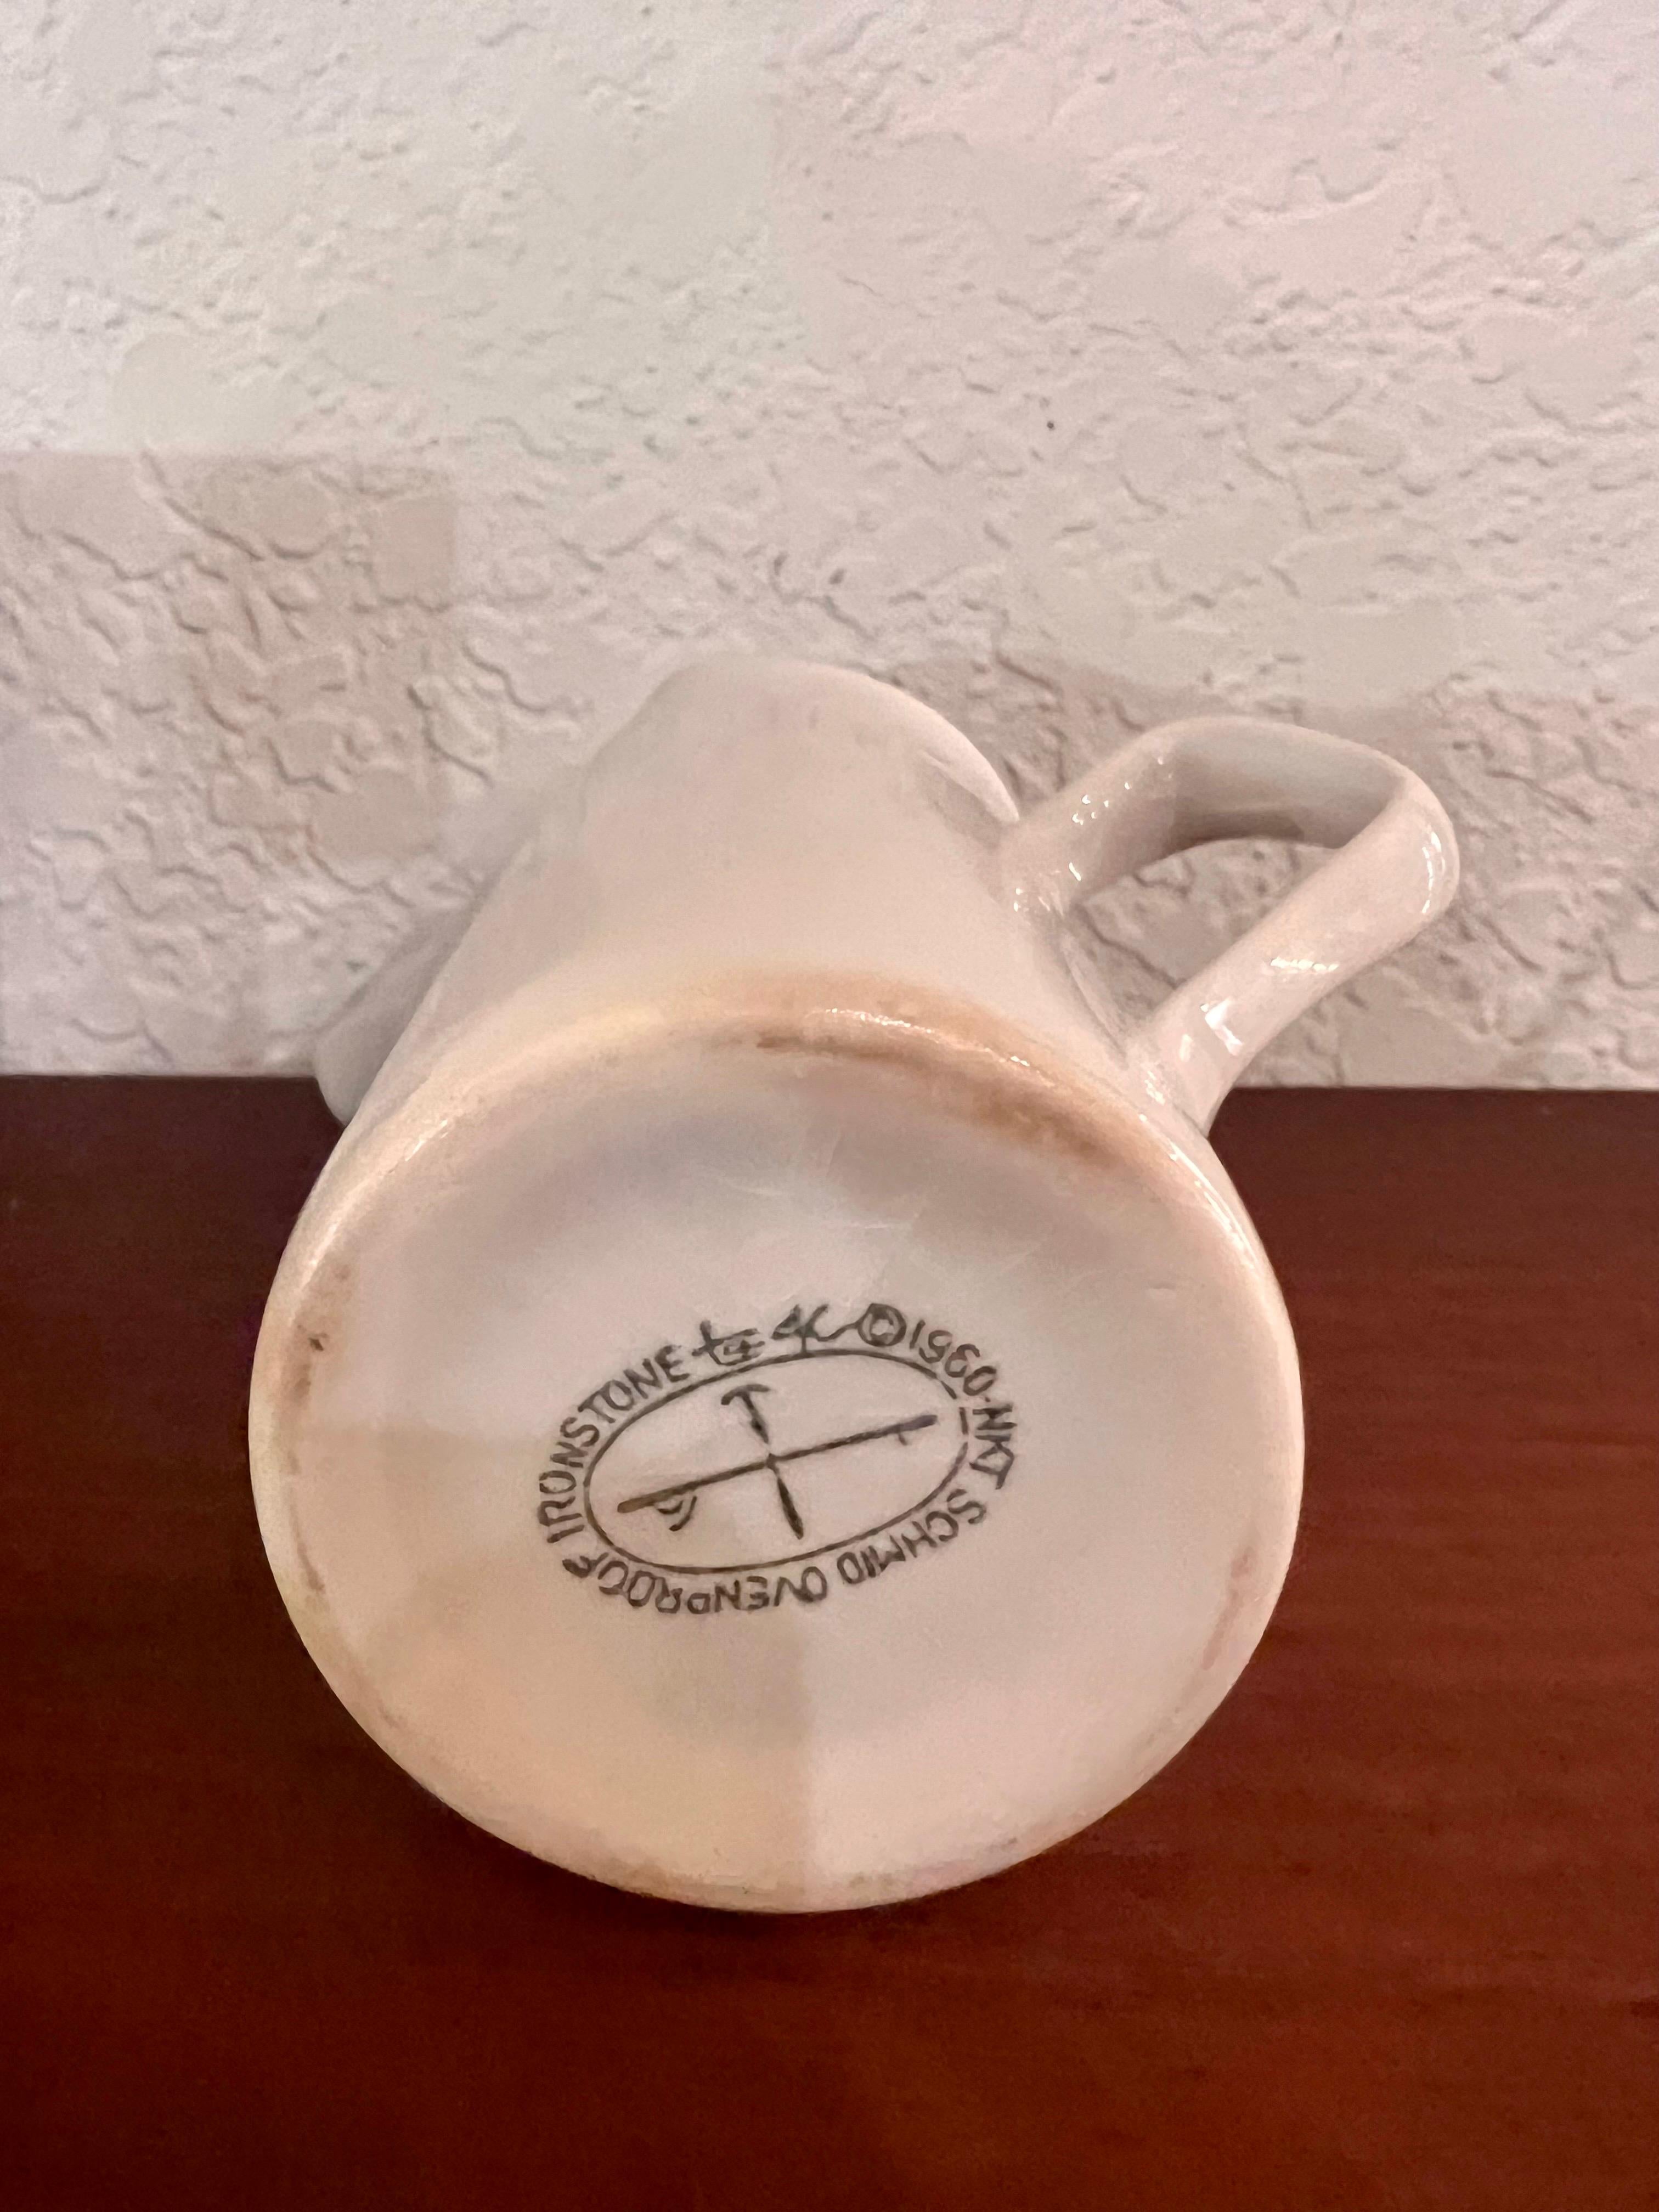 Mid Century Ironstone Porcelain Creamer by Lagardo Tackett for Schmid In Excellent Condition For Sale In San Diego, CA